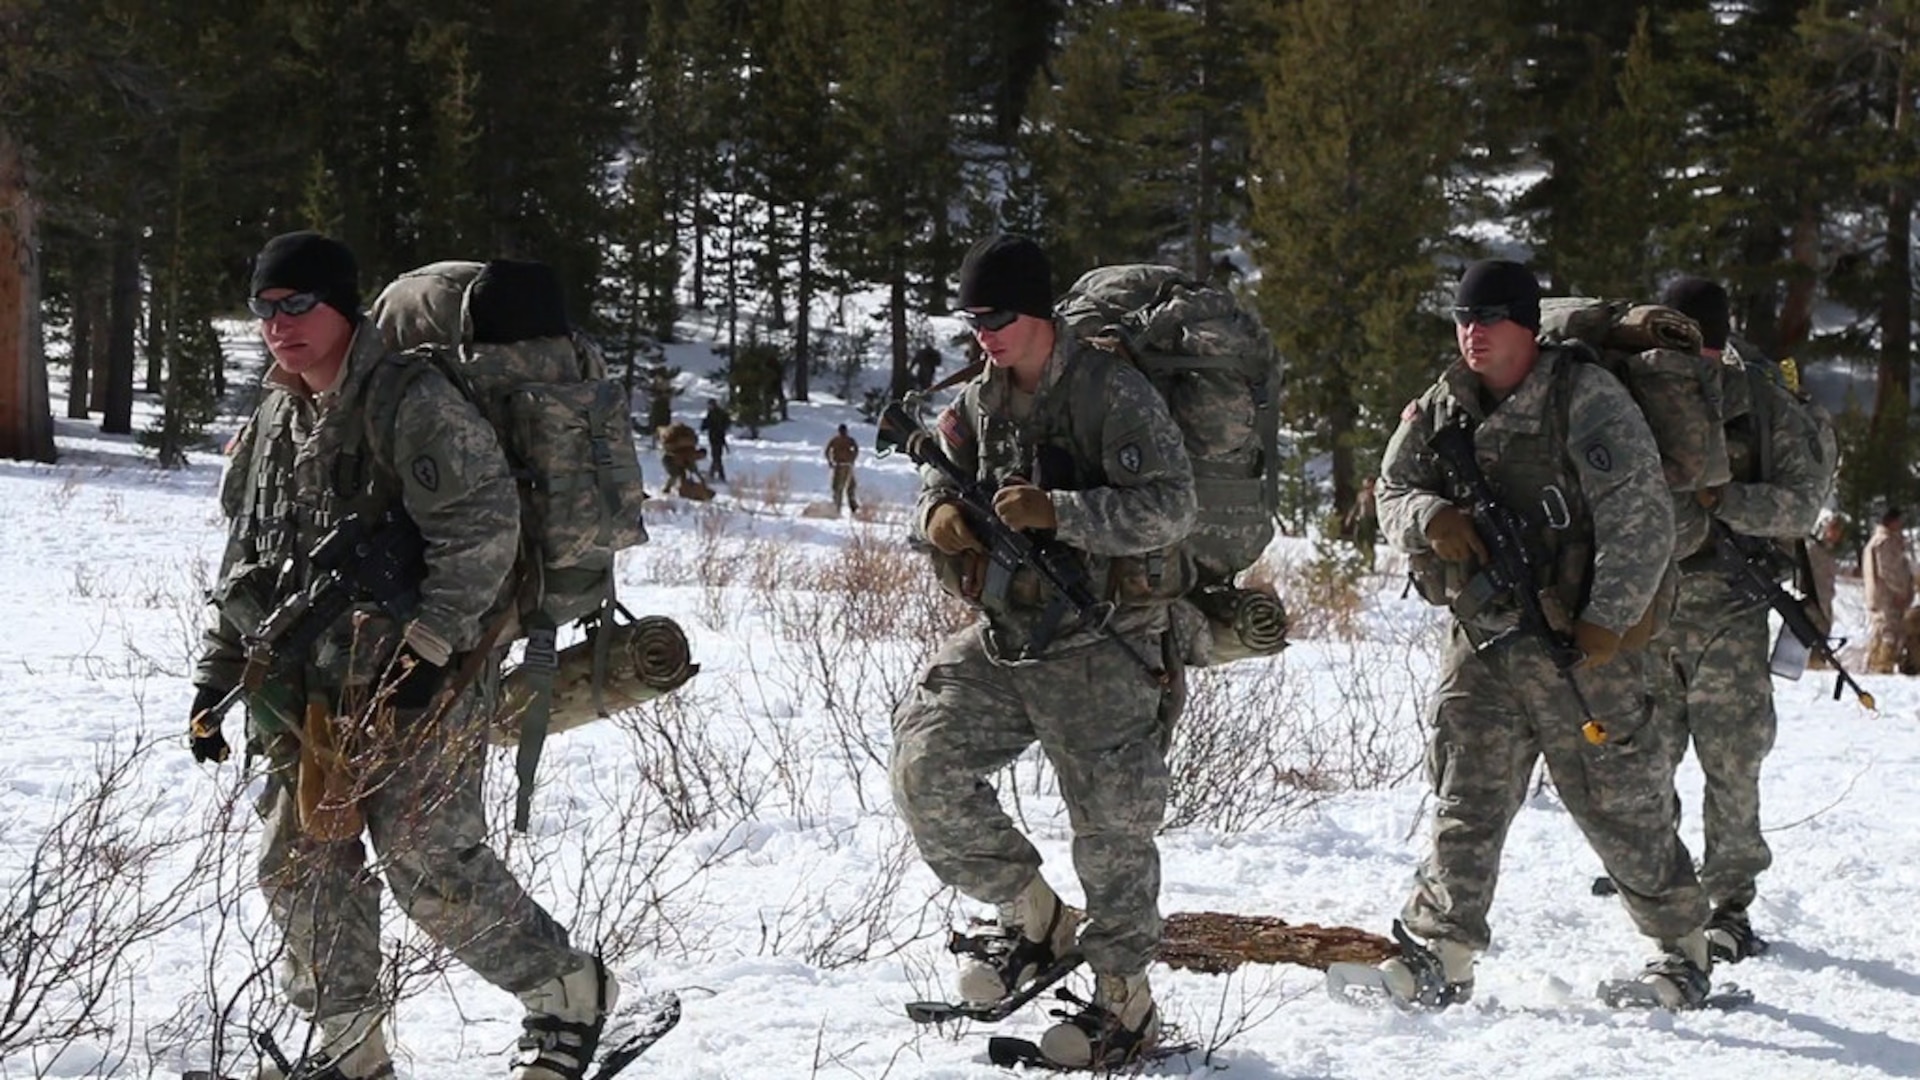 BRIDGEPORT, Calif (Jan. 26, 2015) - Paratroopers assigned to Able Company, 3rd Battalion (Airborne), 509th Infantry execute high-altitude mountain mobility operations at the Marine Corps Mountain Warfare Training Center. The joint training opportunity is part of U.S. Army Alaska's initiative to enhance partnered high altitude cold regions training. 150126-A-ZZZSC-658 